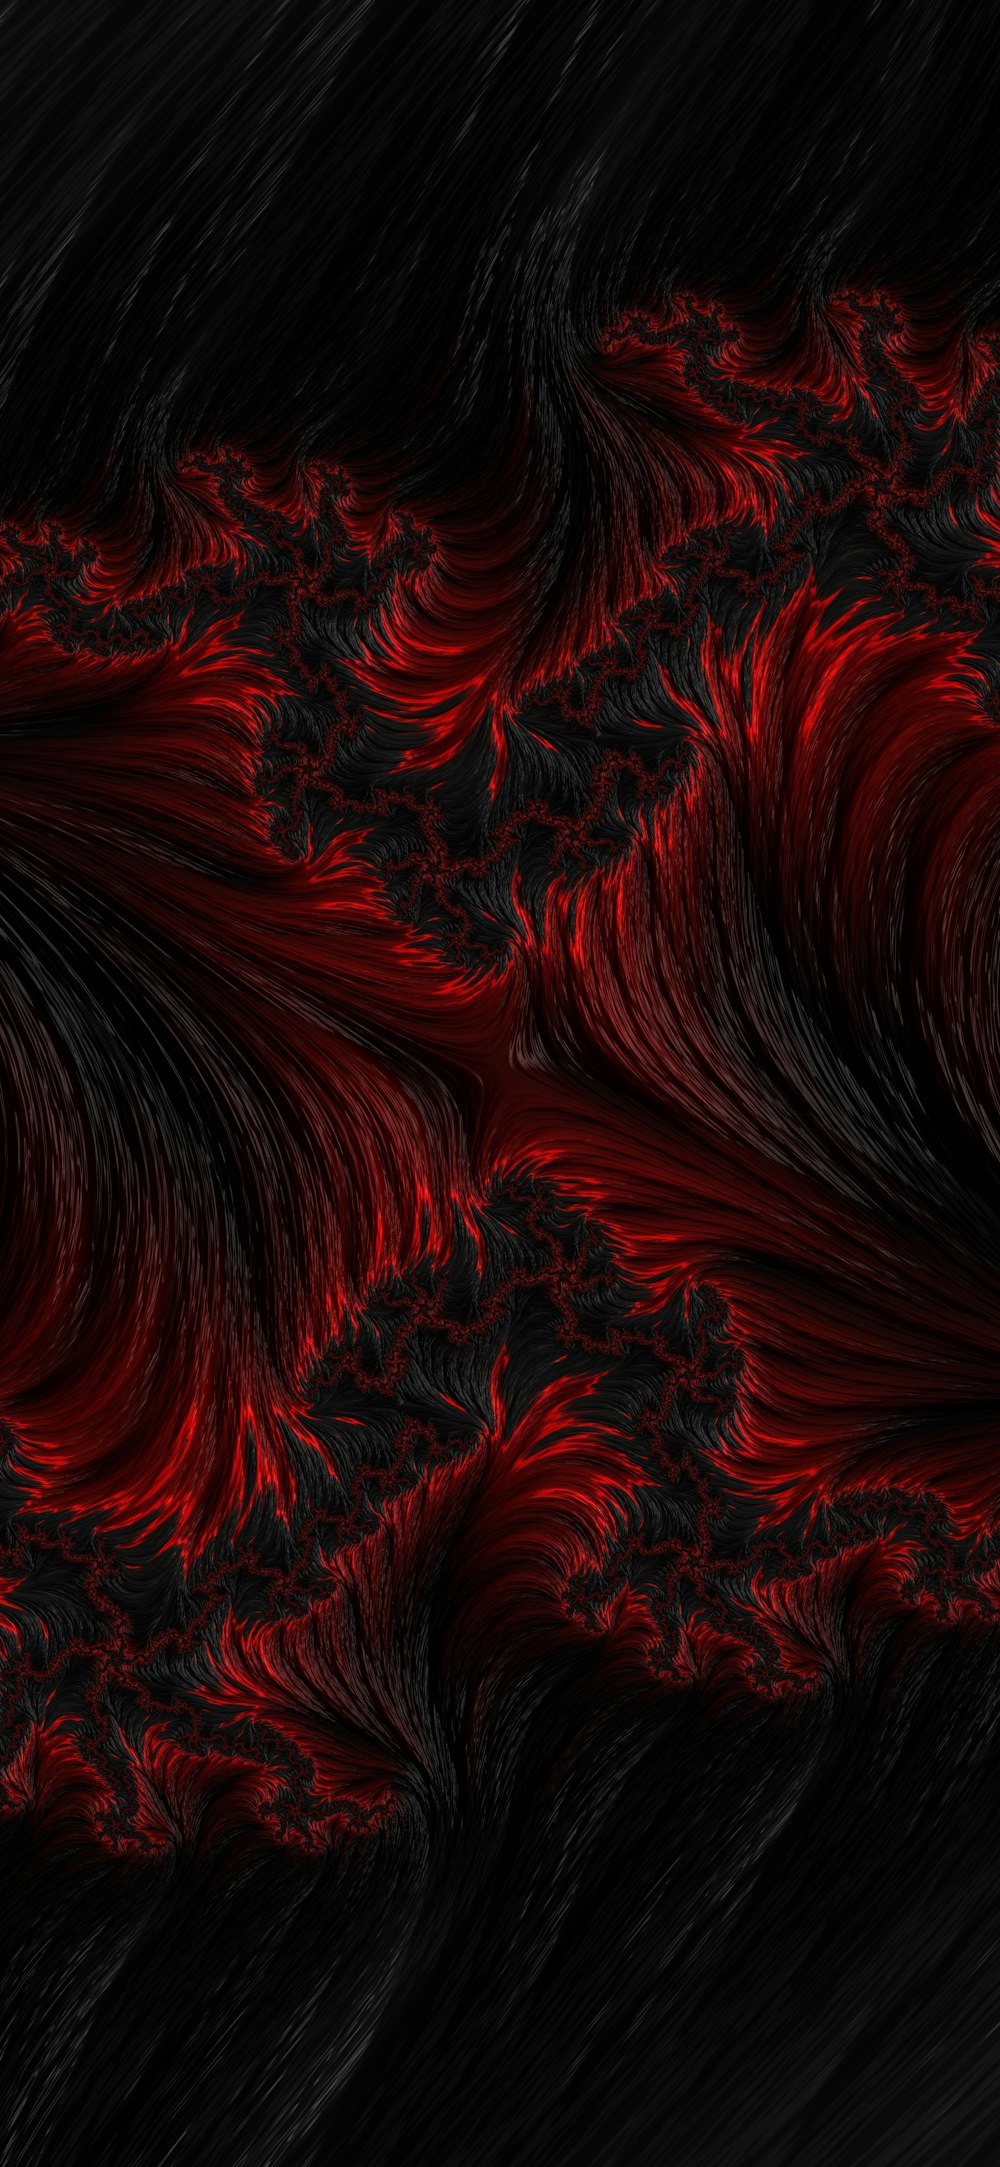 3d Wallpaper Black And Red Image Num 21